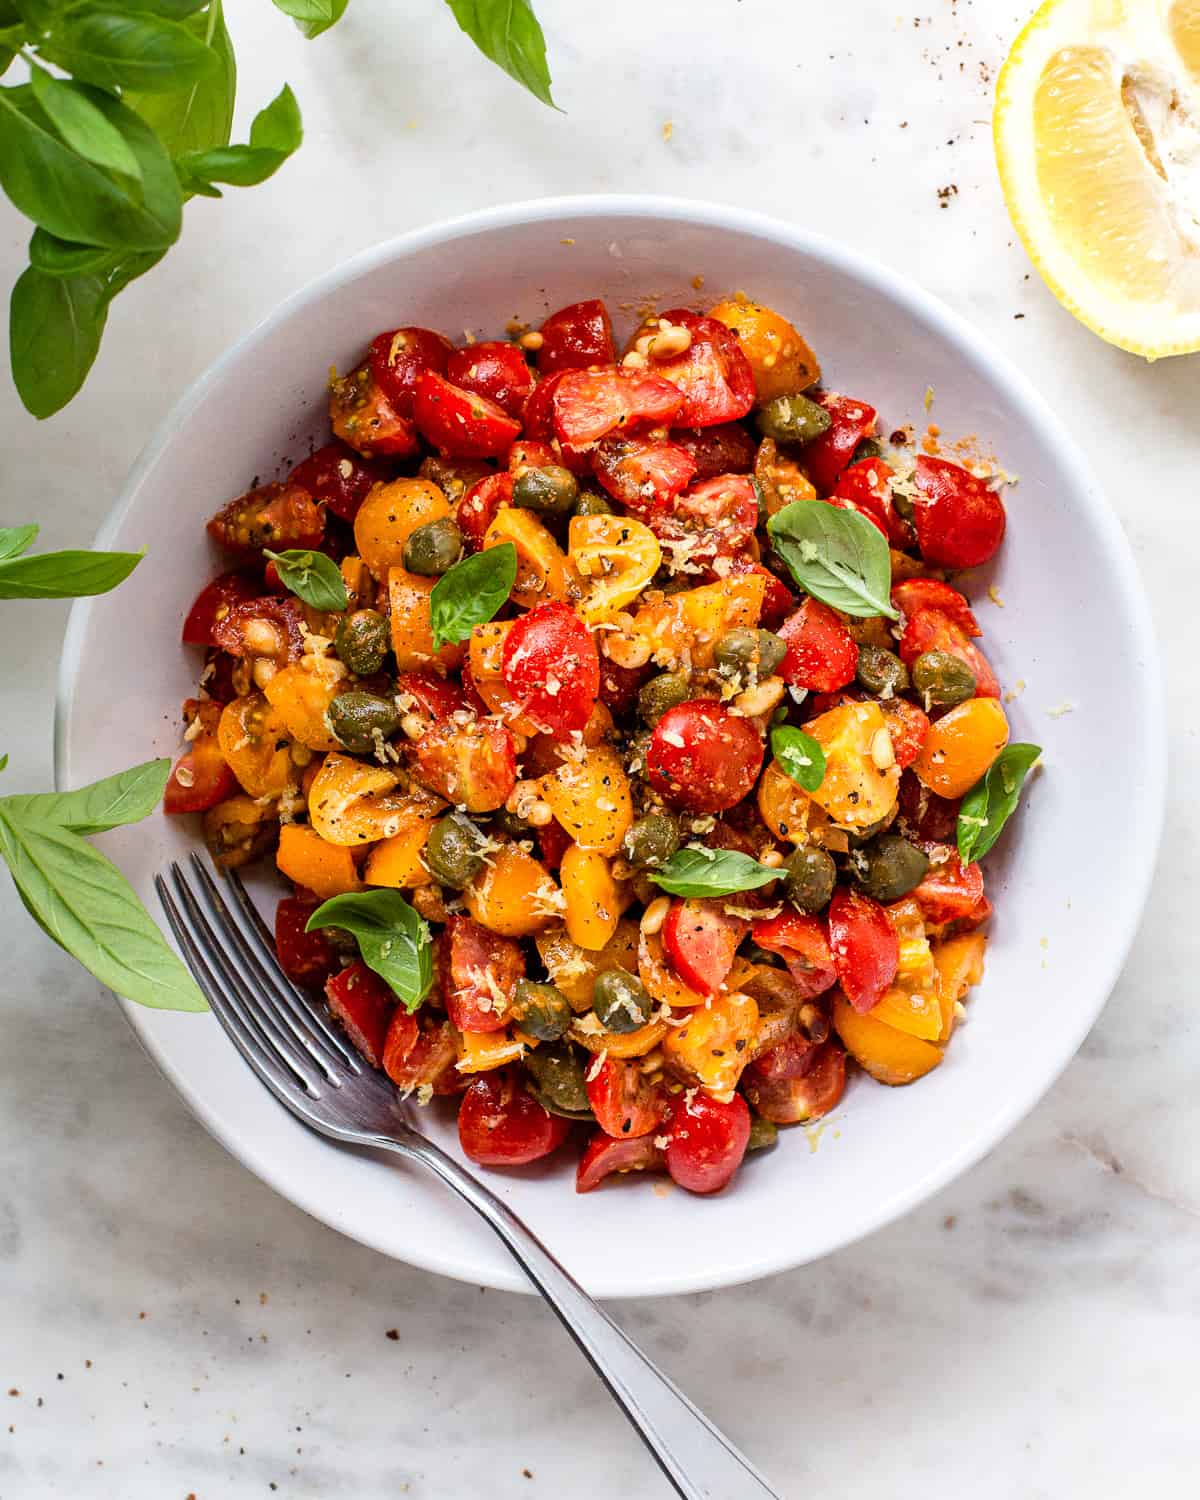 Tomato and caper salad with basil and lemon zest in a white bowl.